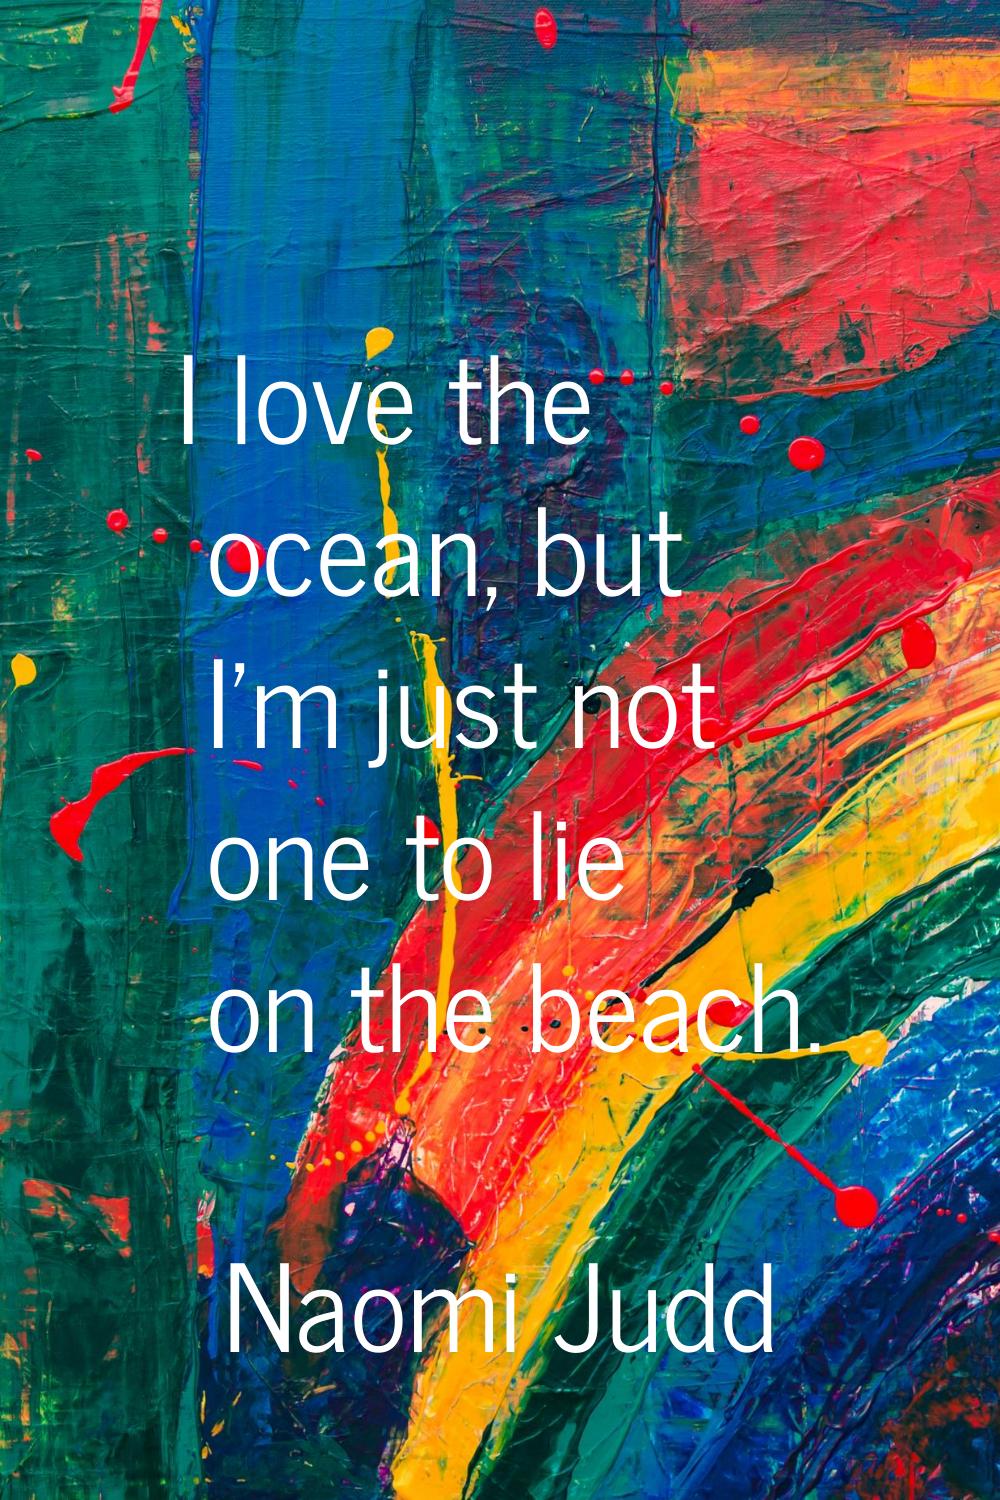 I love the ocean, but I'm just not one to lie on the beach.